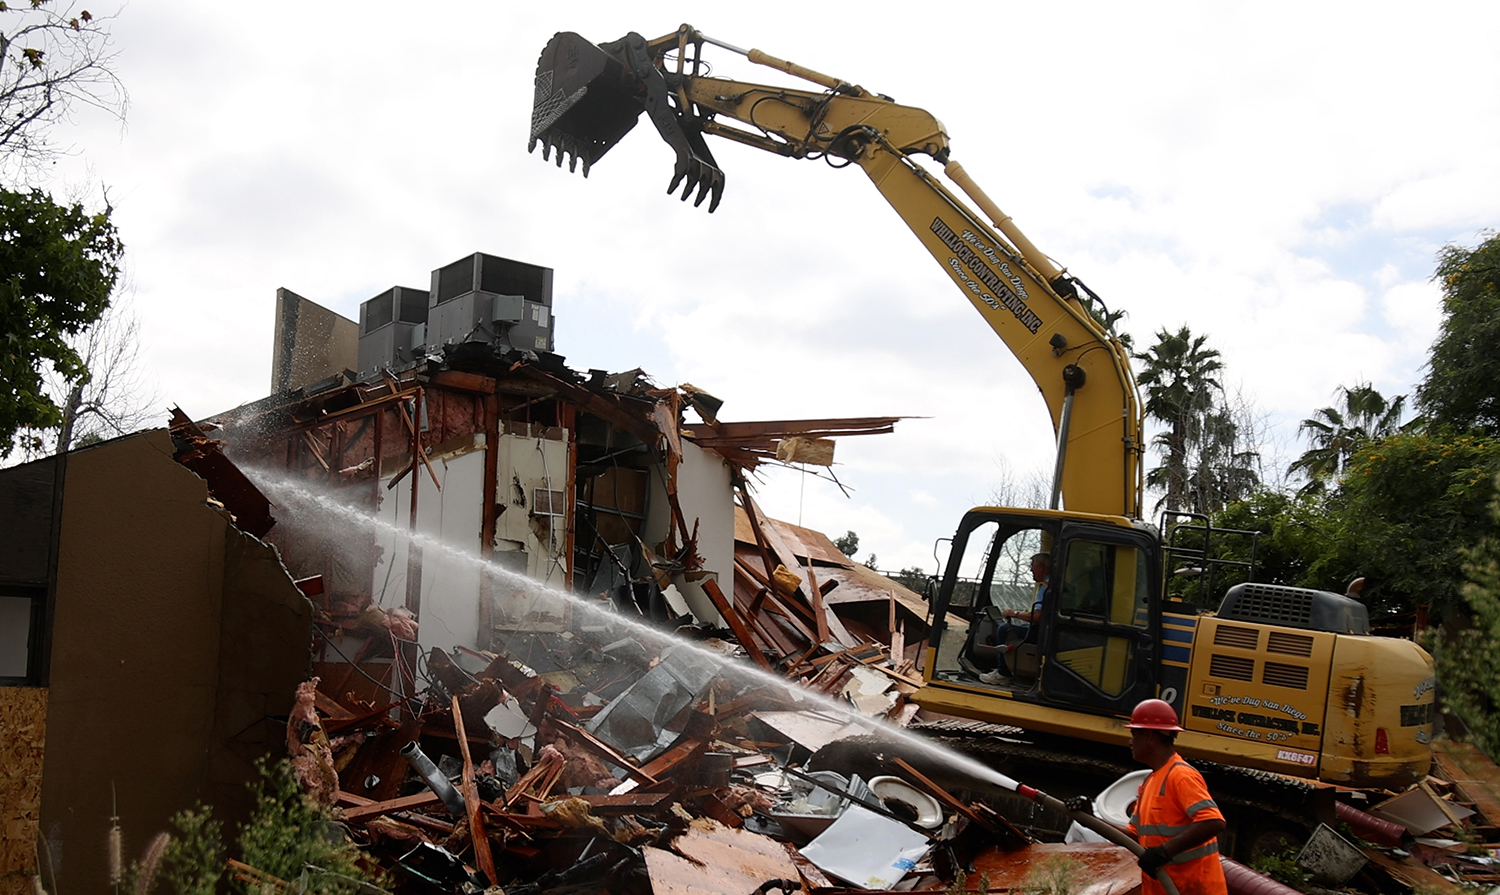 A demolition crew with an earth mover tears down a old building.